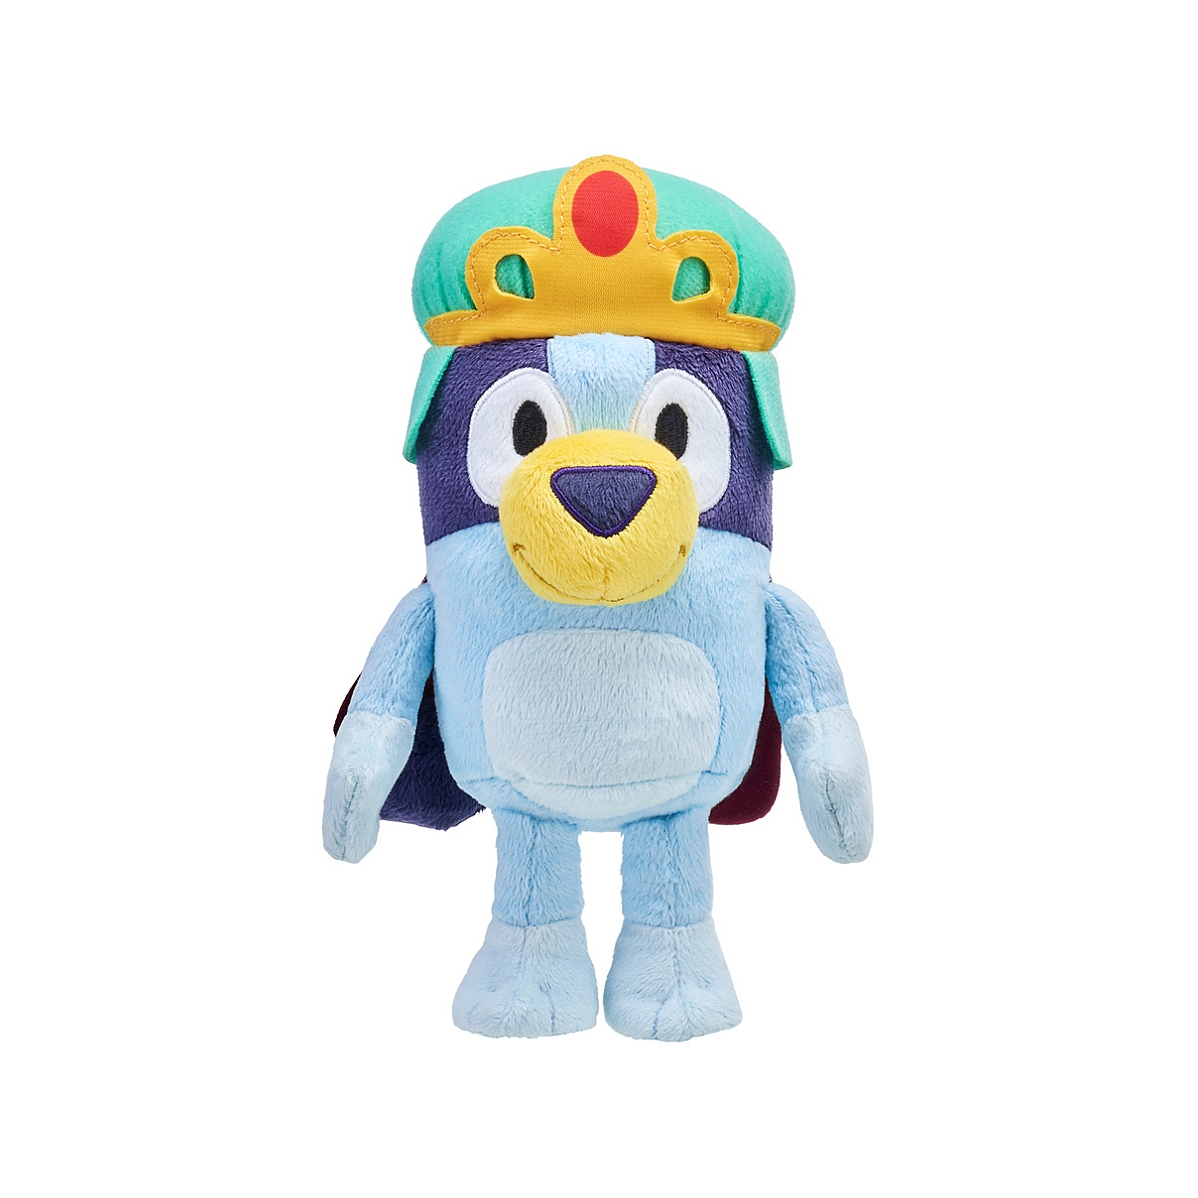 BLUEY Official Licensed Stuffed Animal Soft Plush Toy 10INCHES NEW